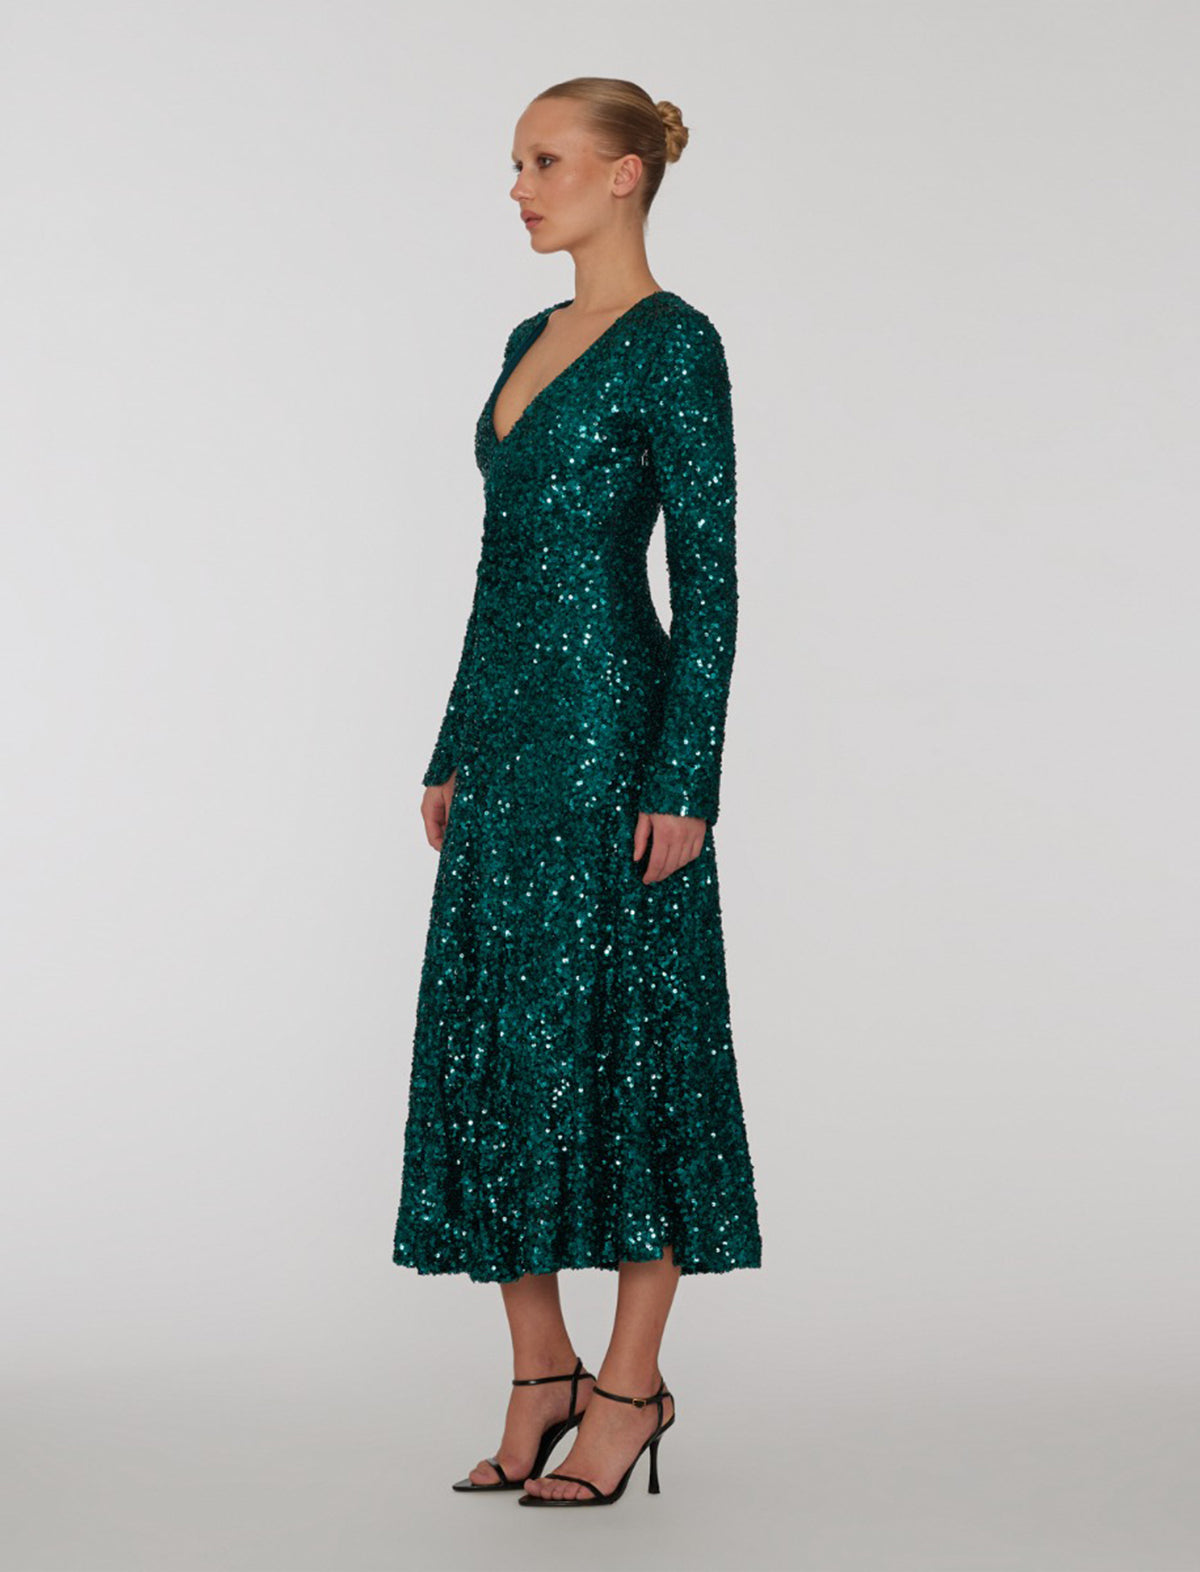 ROTATE Holiday Sierra Sequin Slit Dress in Teal